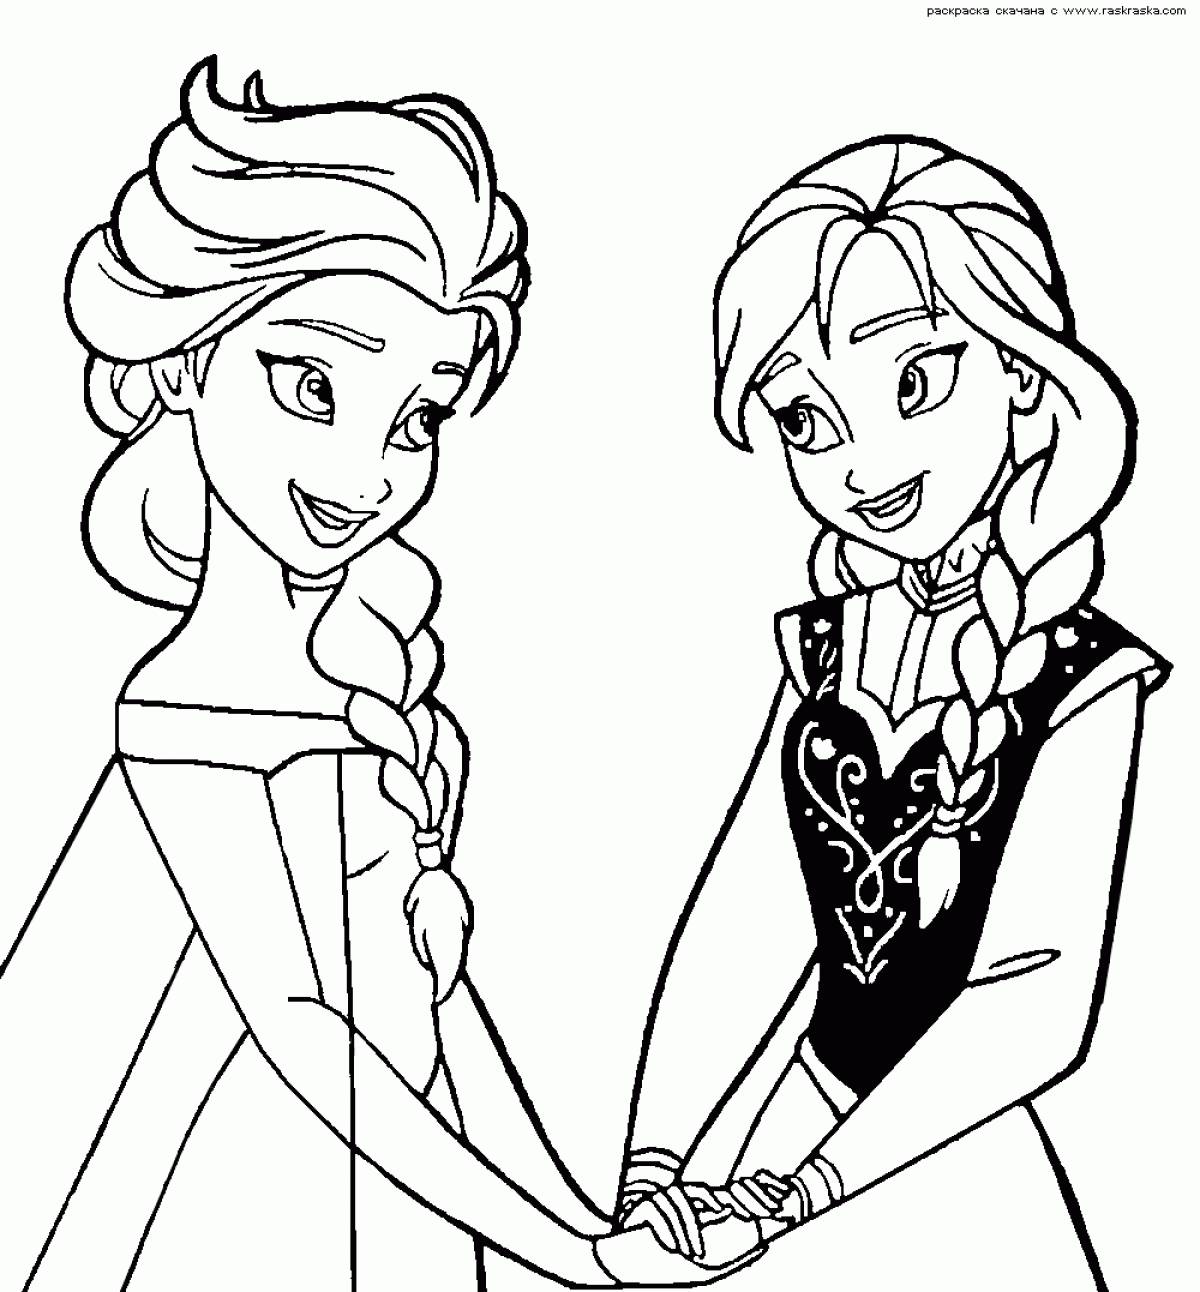 Frozen Elsa and Anna coloring page